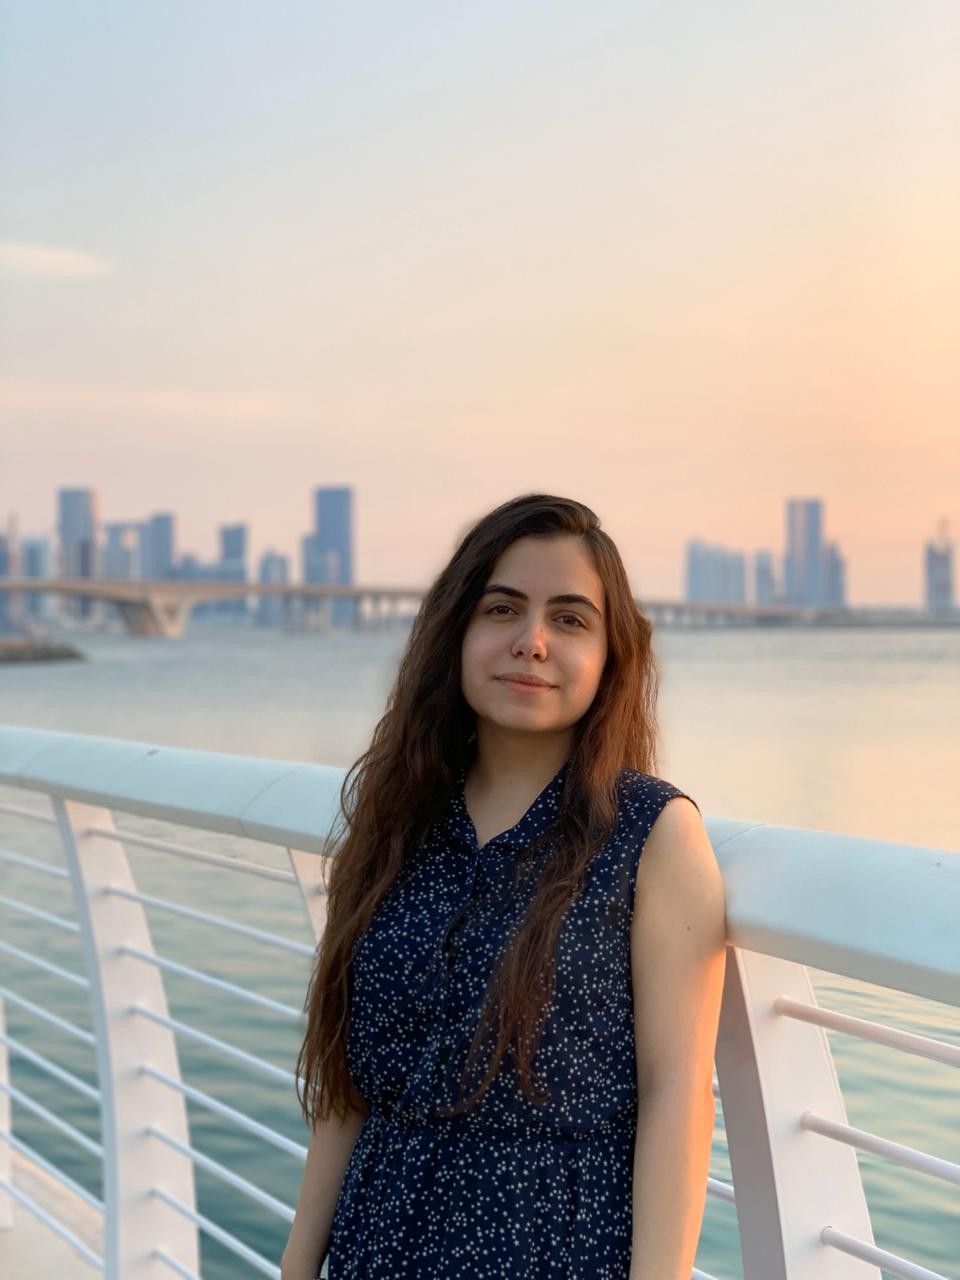 Milena Baghdasaryan, leans against the handrail on the Corniche, at sunset.